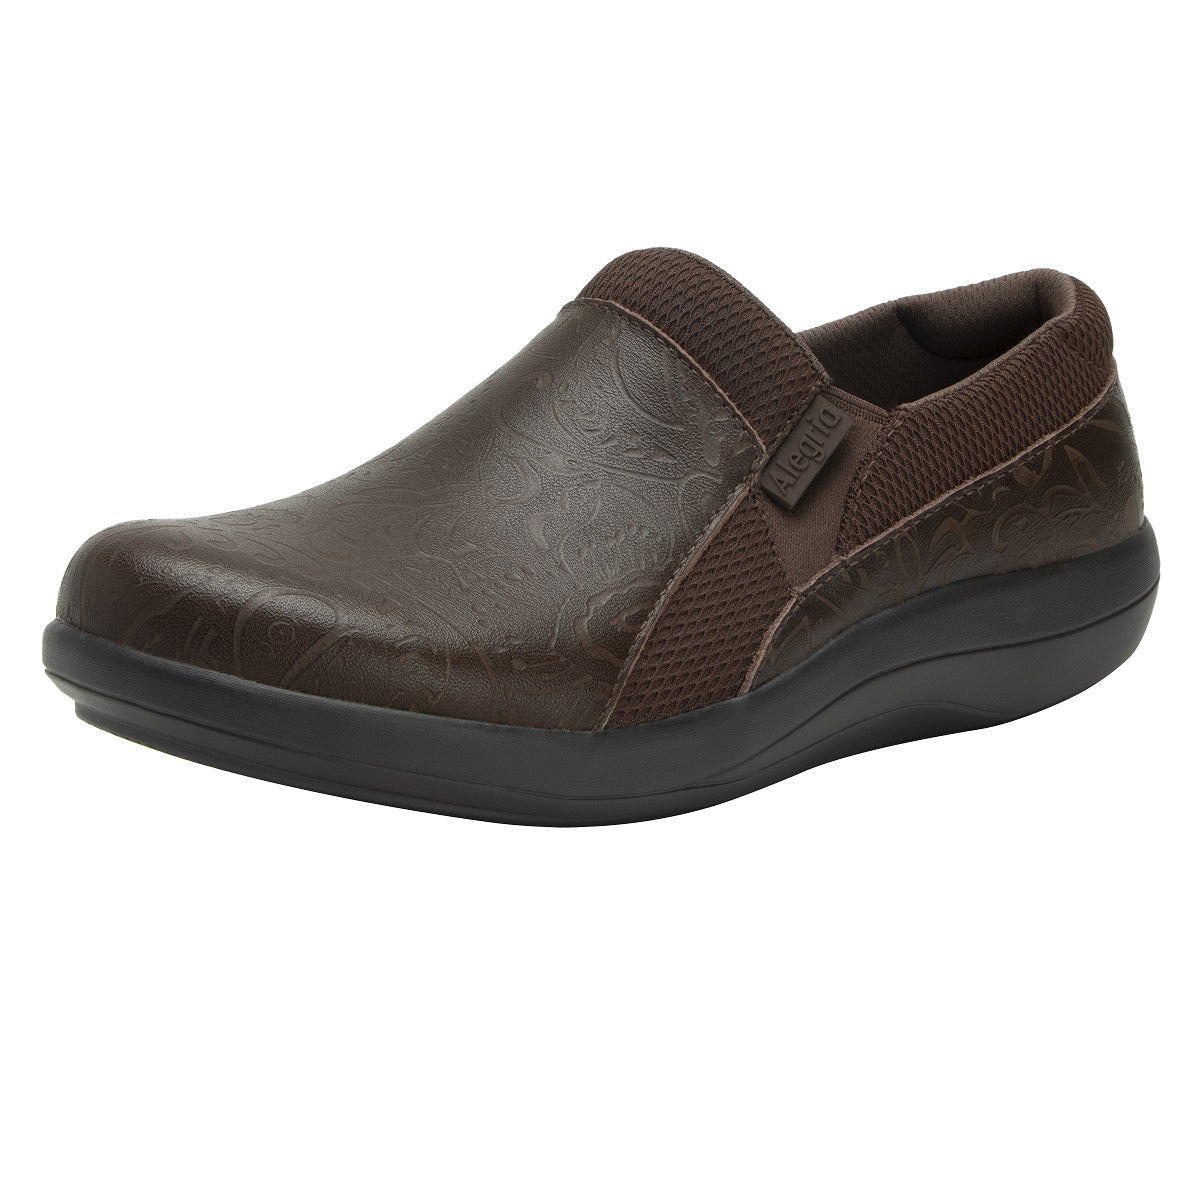 Alegria Duette Shoe in Fudge at Parker's Clothing and Shoes.